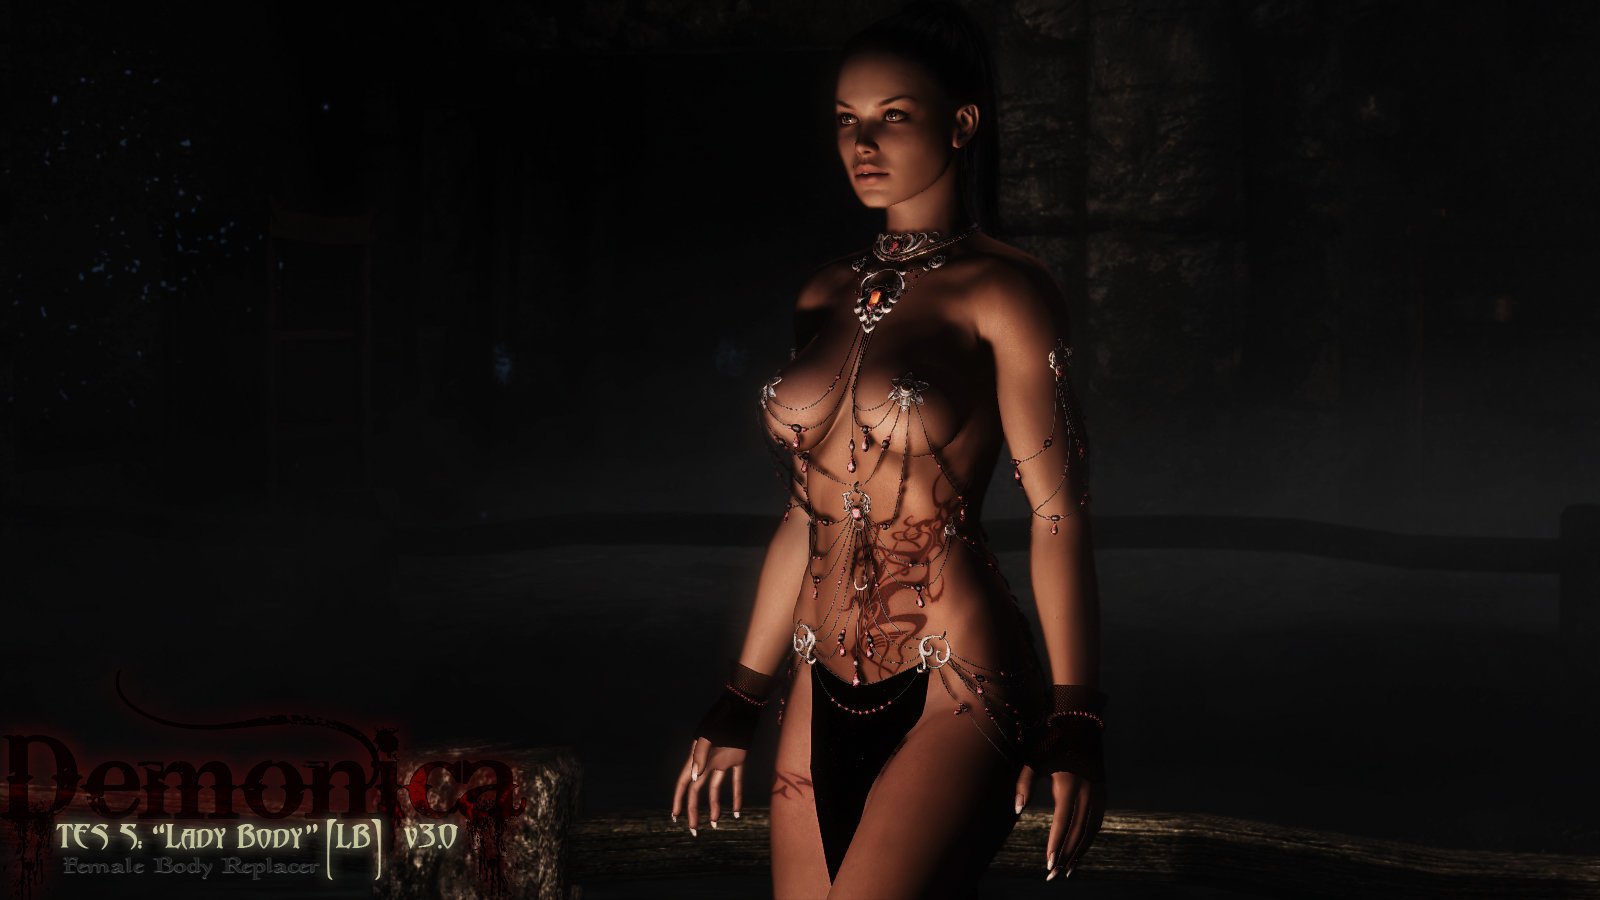 [search] Body Jewelry For Cbbe Request And Find Skyrim Adult And Sex